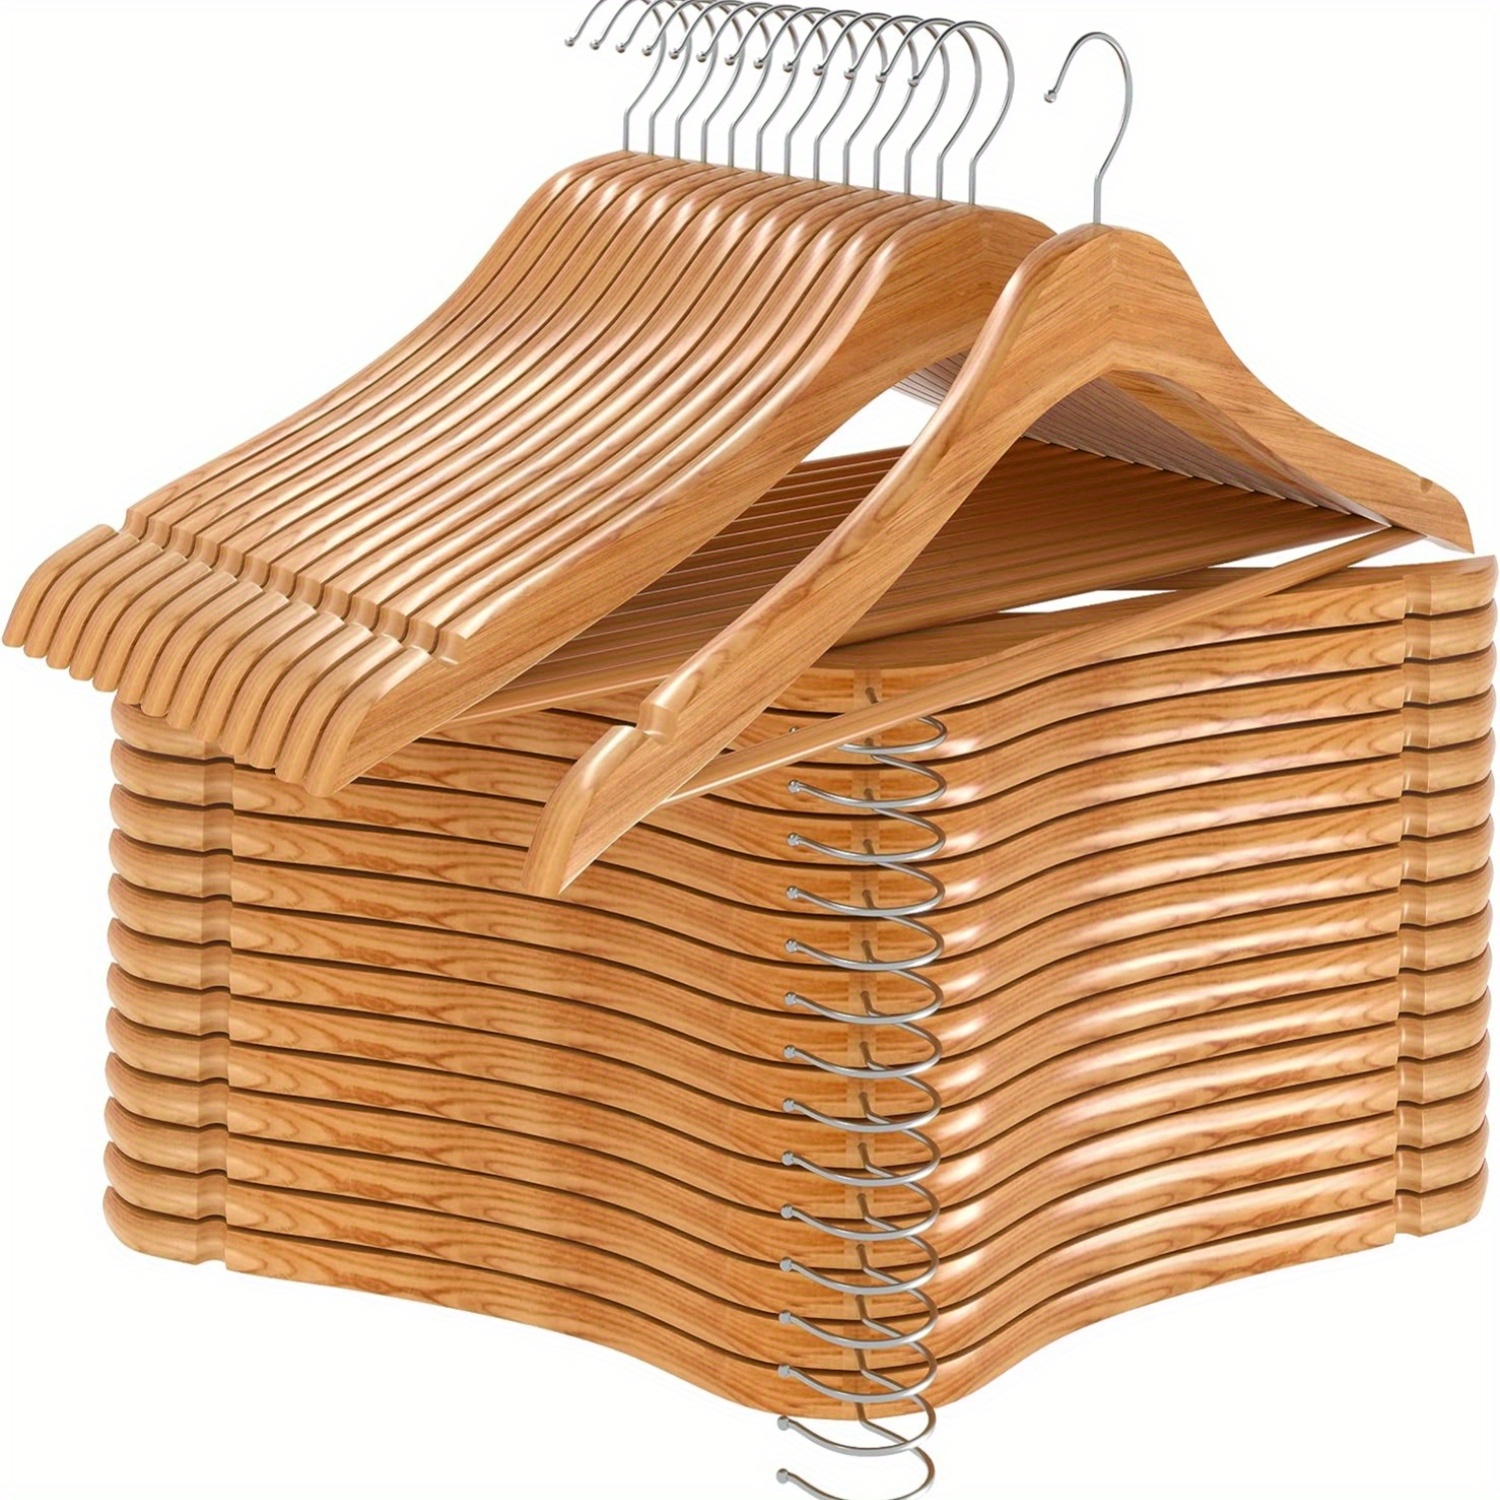 

20pcs Non-slip Wooden Clothes Hangers With , Solid Wooden Drying Rack For Wardrobes, Bedrooms, Household Space Saving Storage Organizer For Bedroom, Bathroom, Closet, Wardrobe, Home